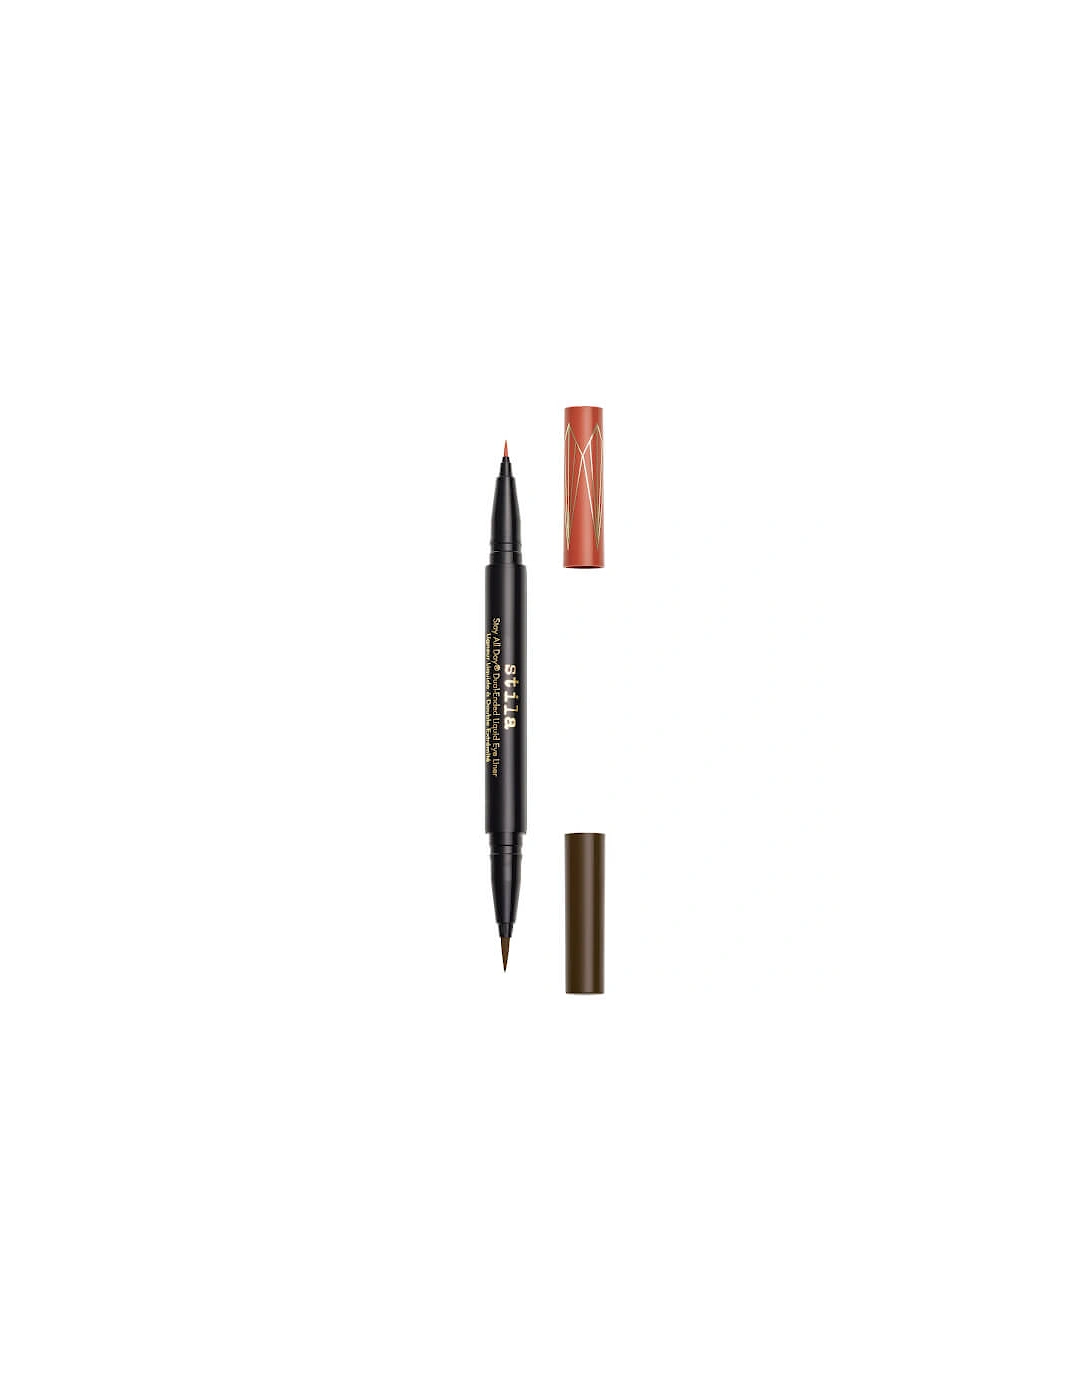 Stay All Day Dual-Ended Liquid Eye Liner - Amber/Dark Brown, 2 of 1